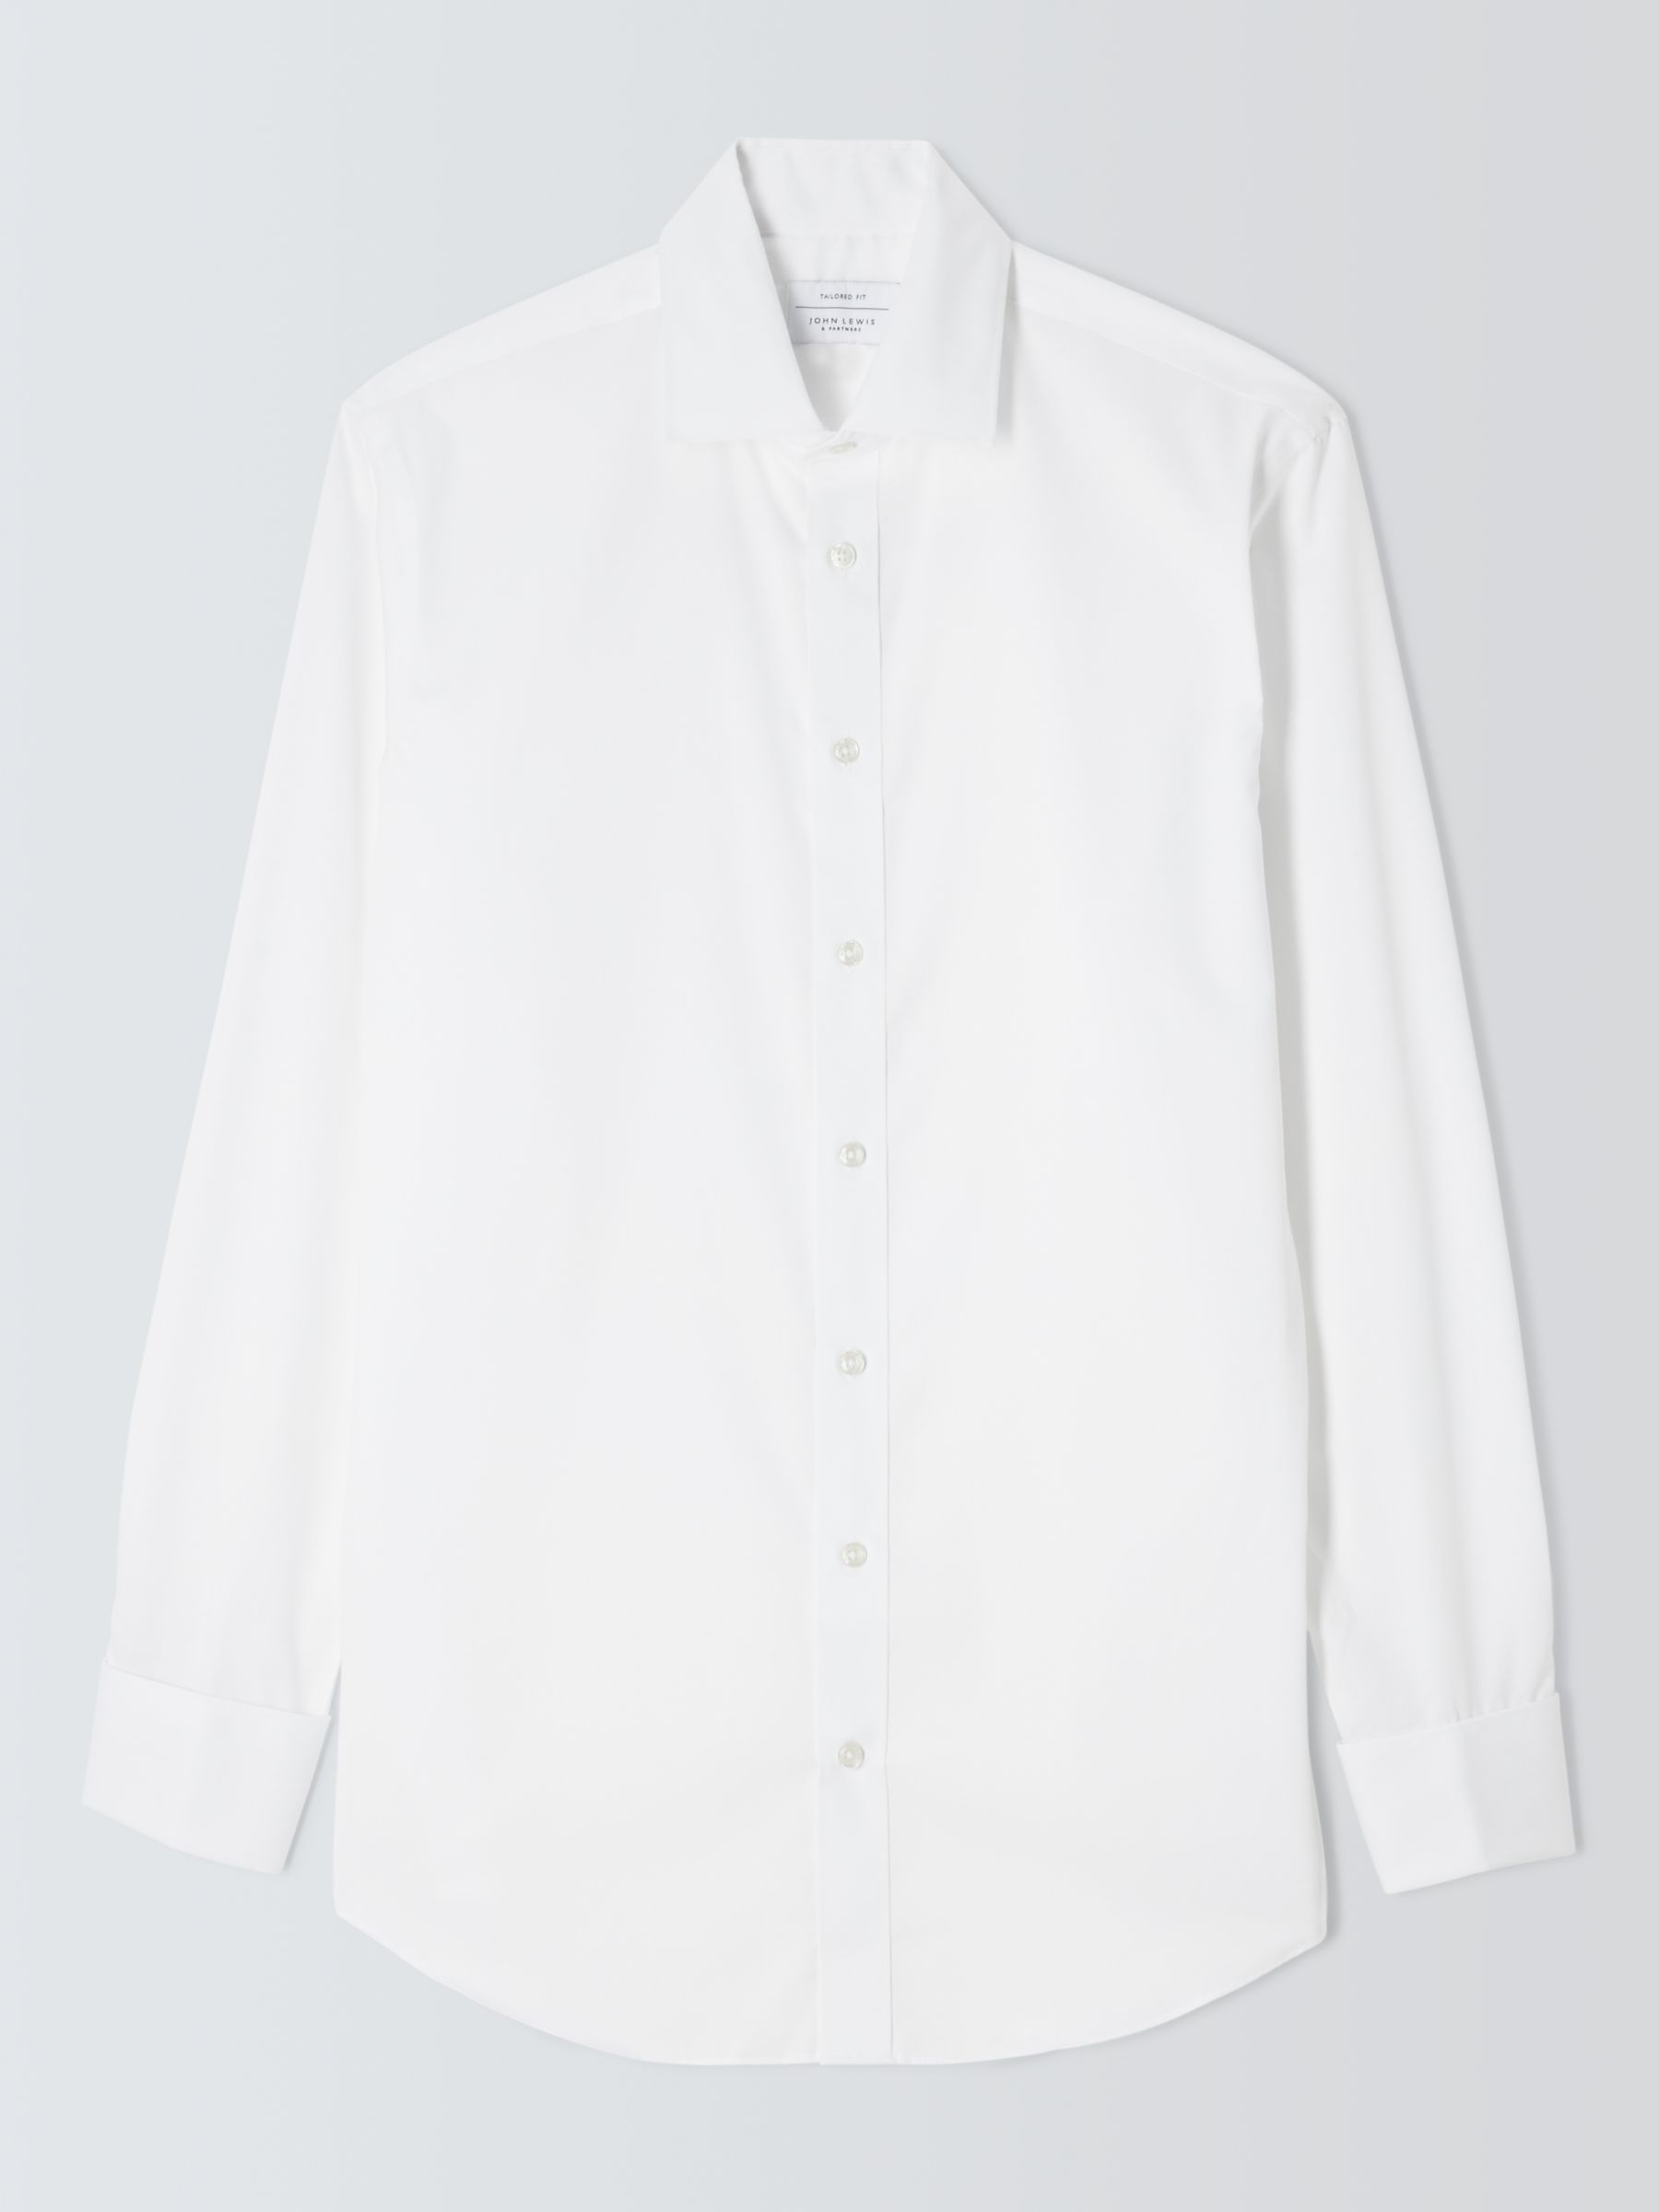 John Lewis Non Iron Twill Double Cuff Tailored Fit Shirt, White, 17.5R